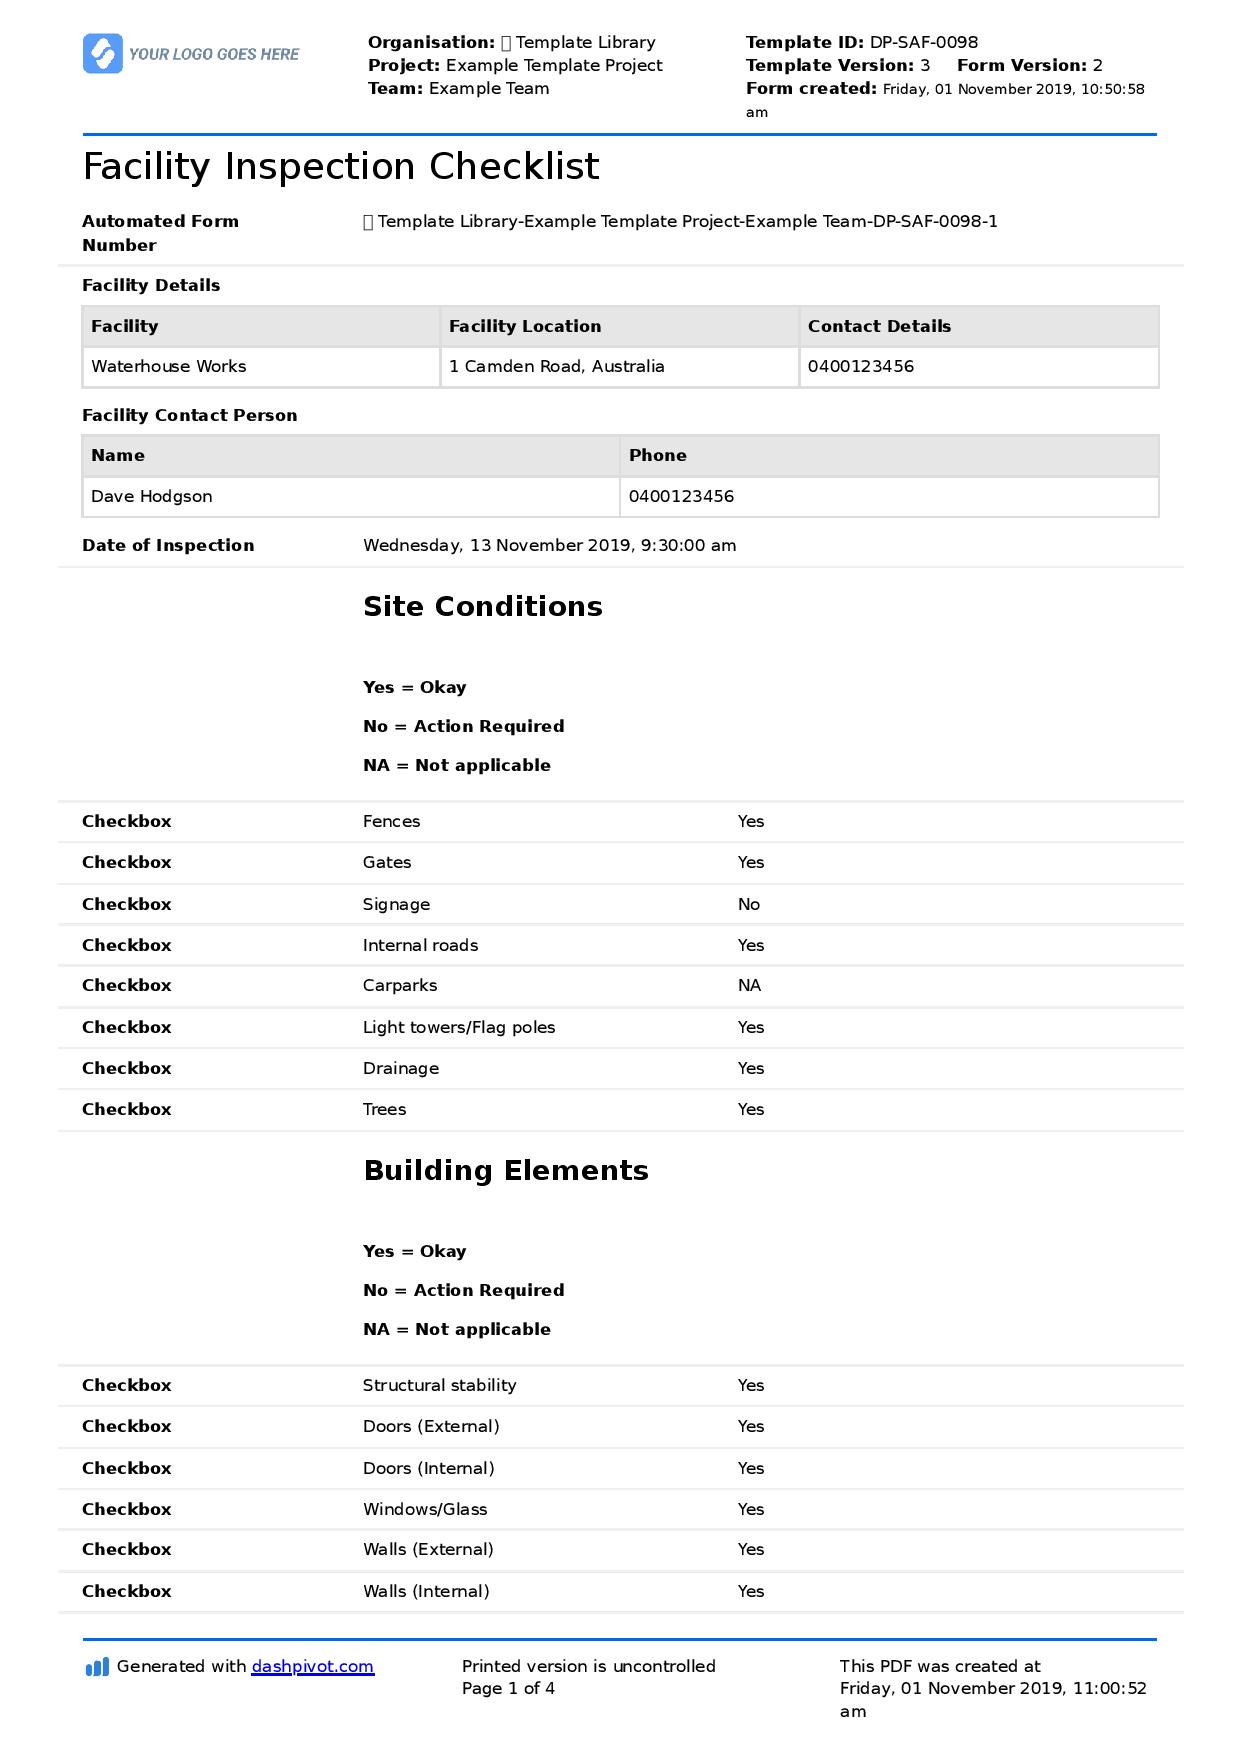 Facility Inspection Checklist template (Better than excel, PDF forms) For Facility Maintenance Checklist Template Regarding Facility Maintenance Checklist Template